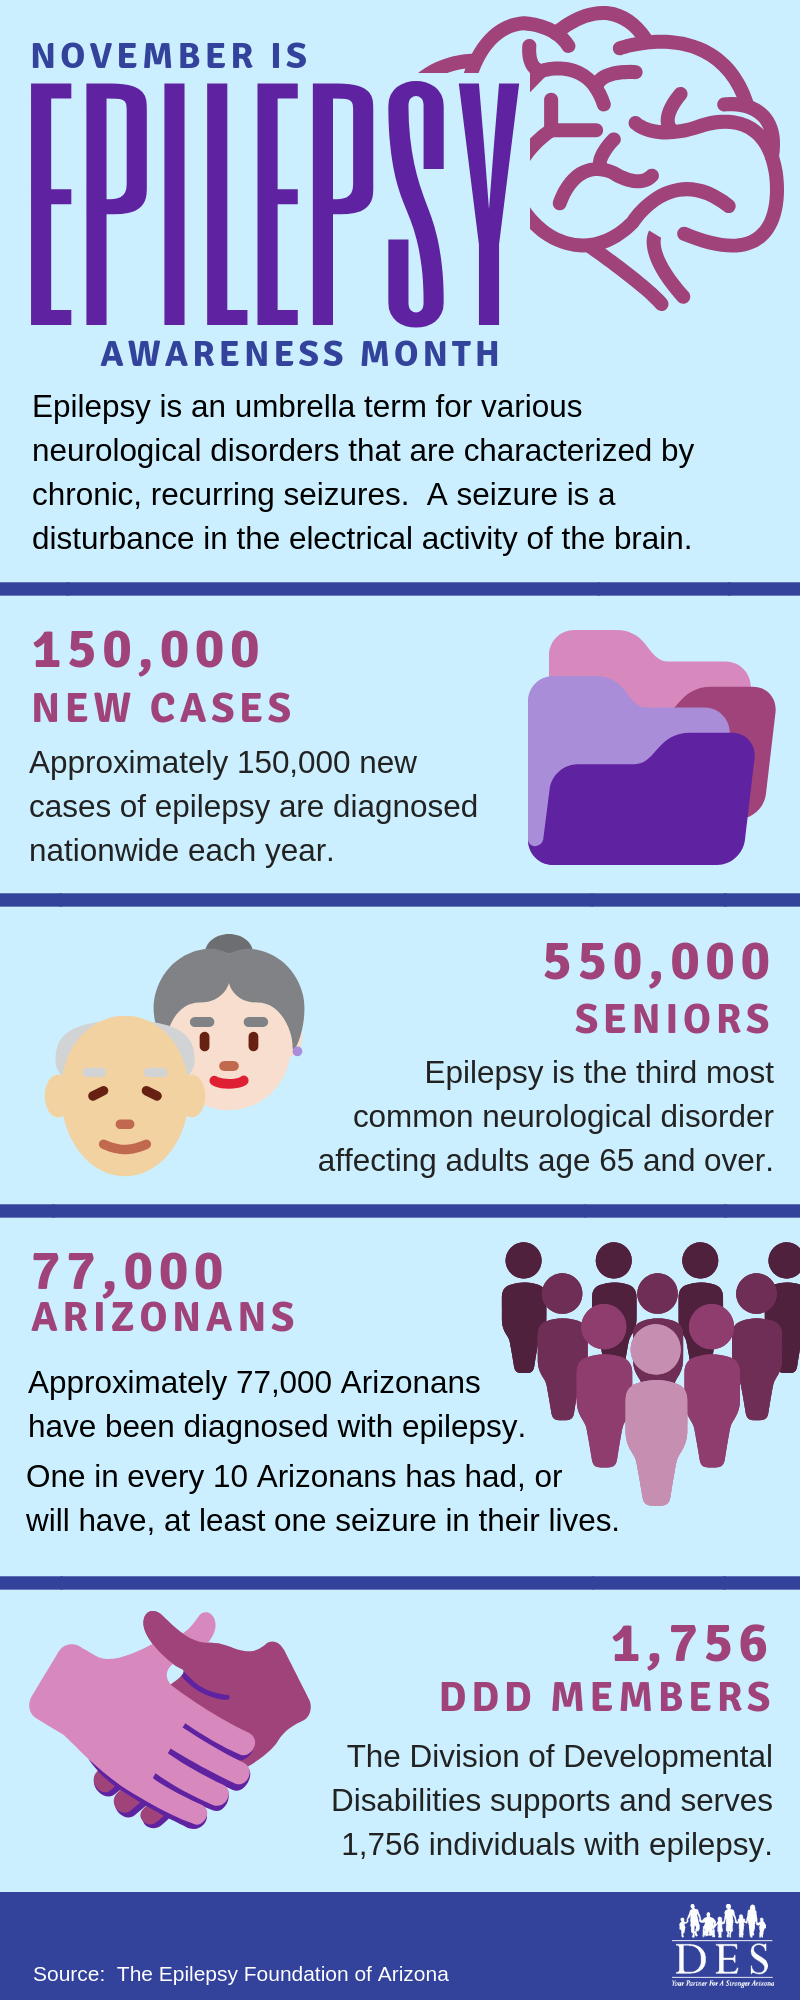 Facts and figures about epilepsy